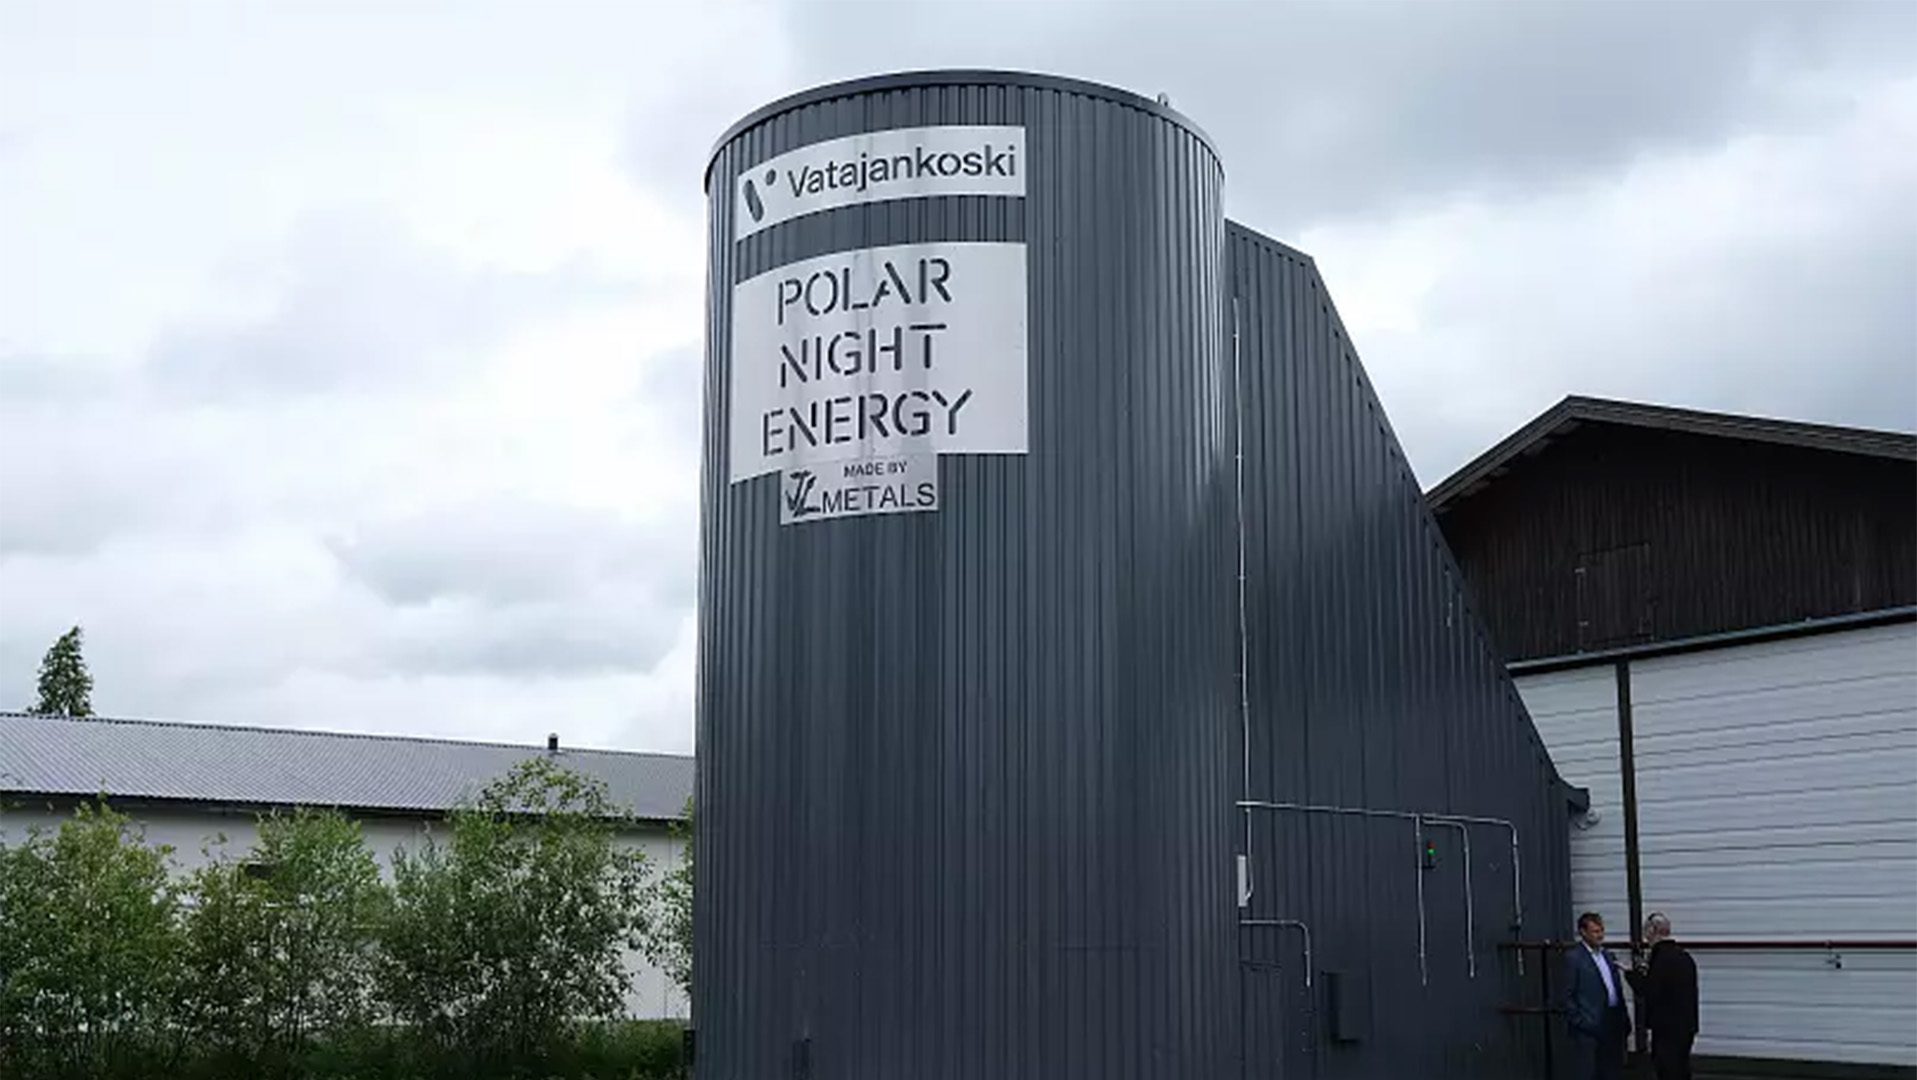 The sand inside the silo can store heat at around 500C for several months; Photo Credit: Polar Night Energy